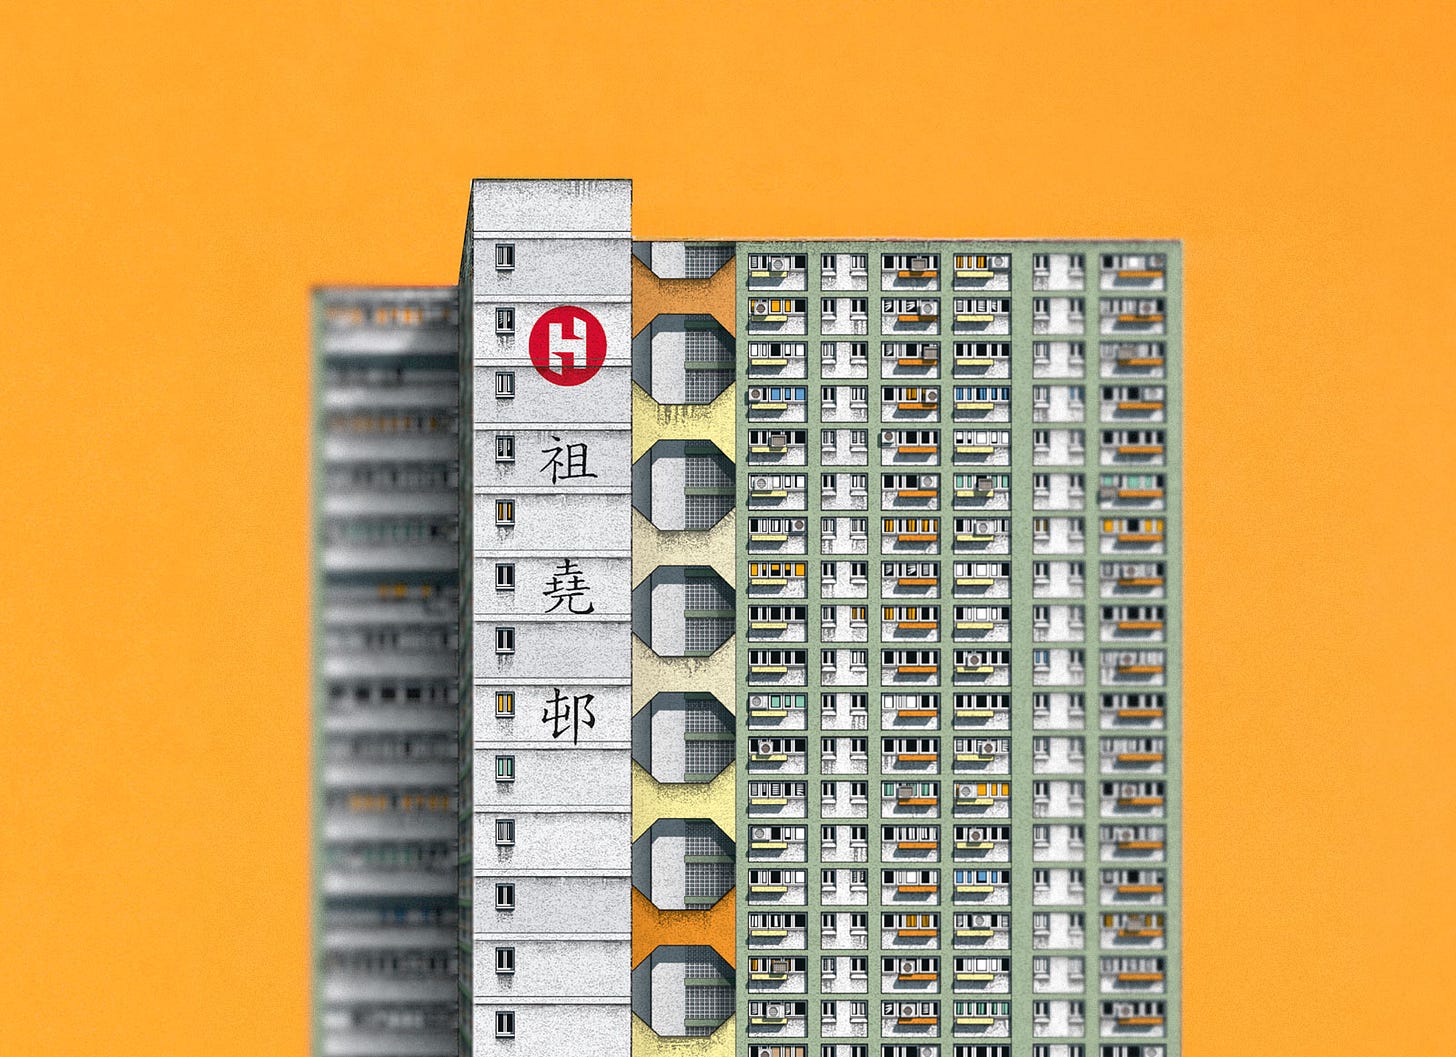 A detail of the paper model of the main tower block at Cho Yiu Chuen